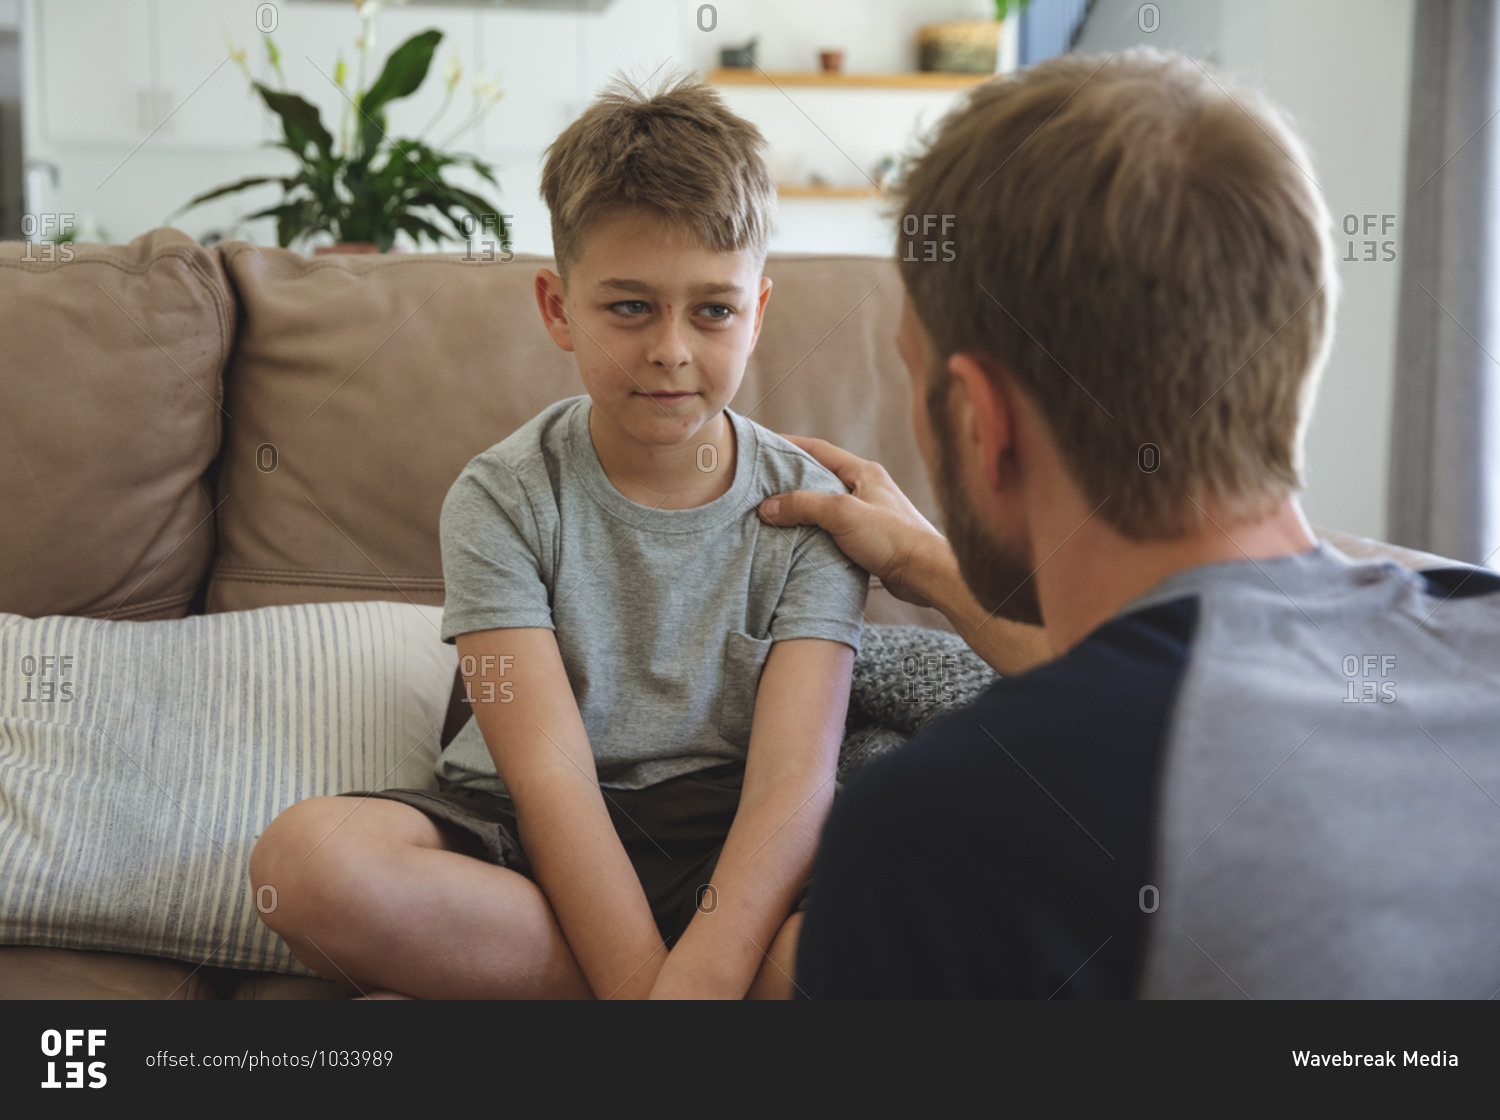 Caucasian man at home with his son together, sitting on sofa in living room, talking to each other. Social distancing during Covid 19 Coronavirus quarantine lockdown.